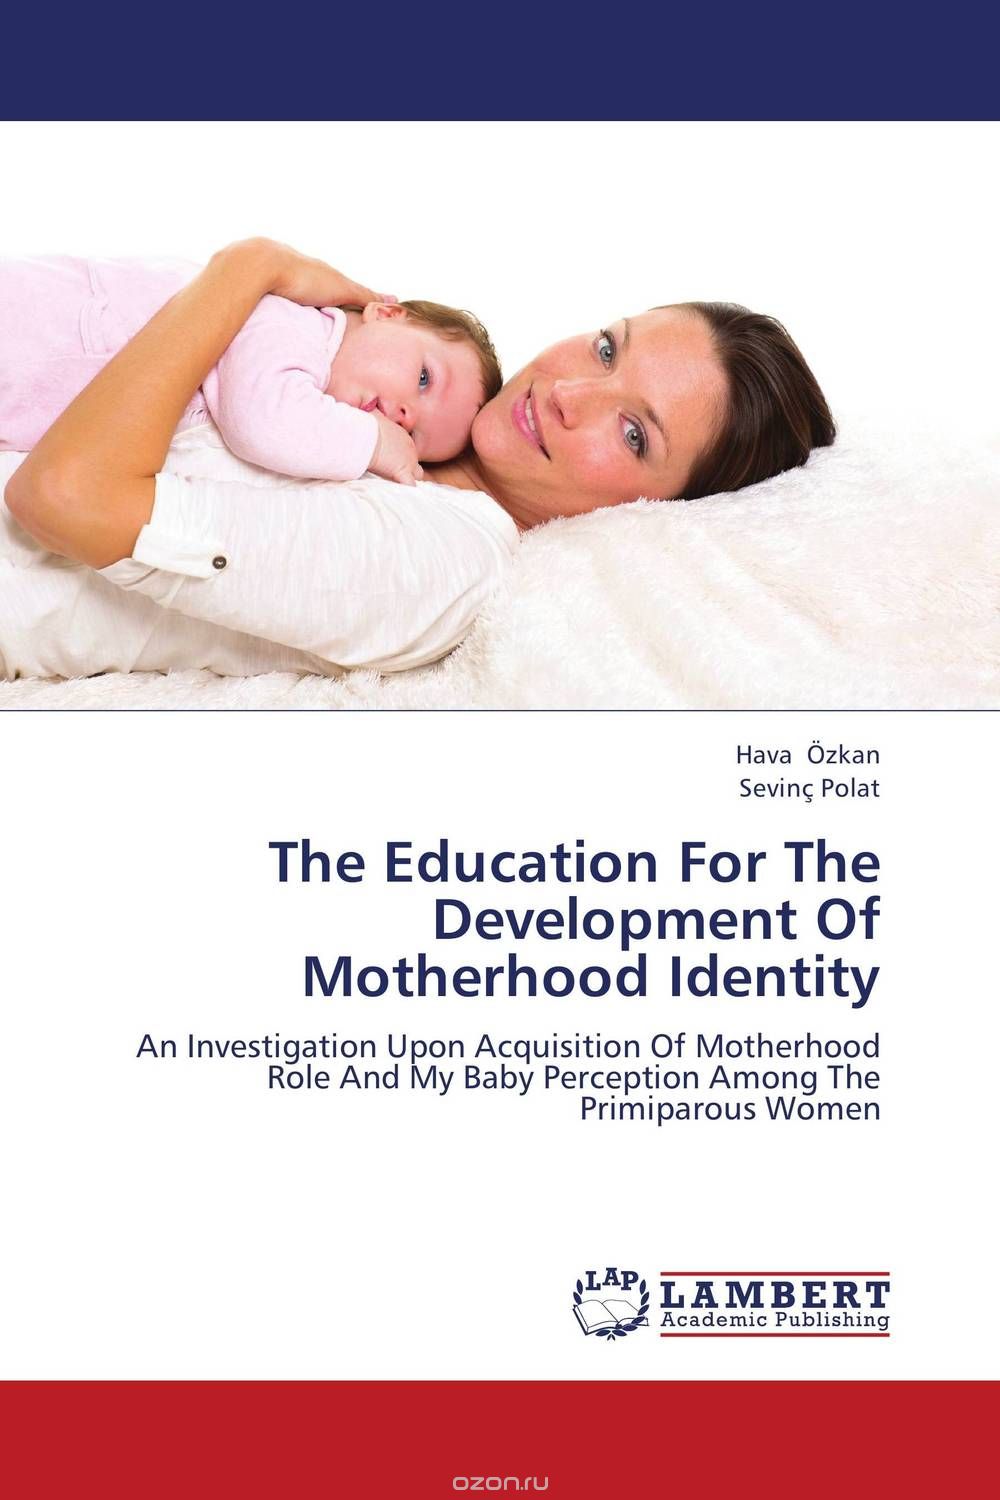 The Education For The Development Of Motherhood Identity